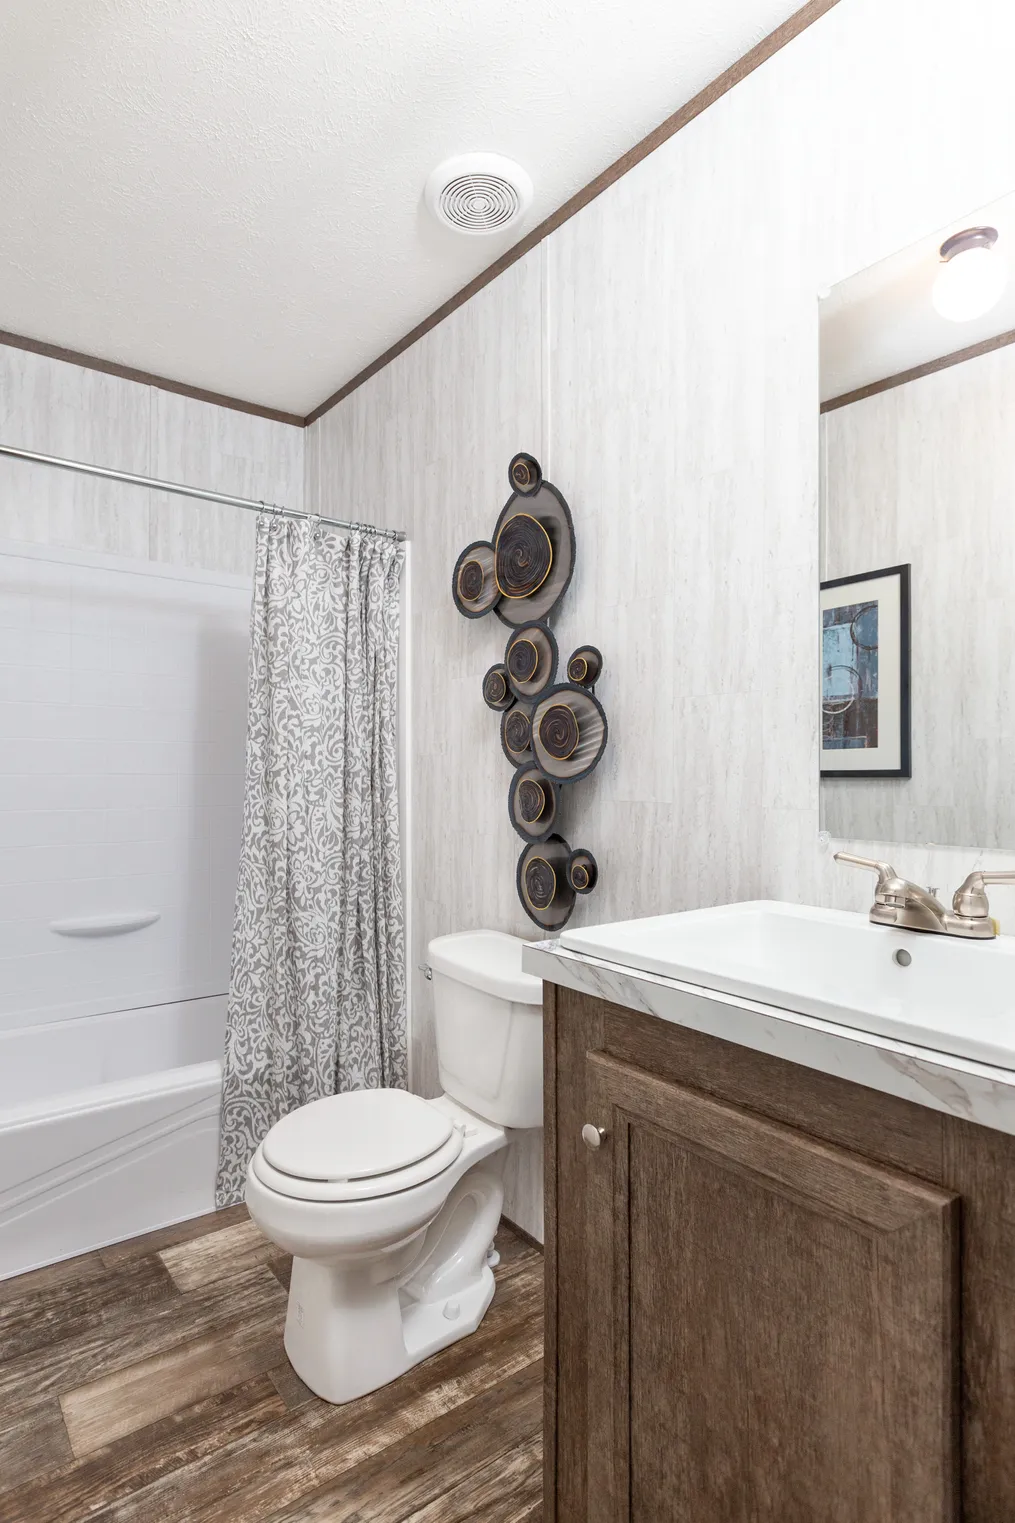 The MAYNARDVILLE CLASSIC 76 Guest Bathroom. This Manufactured Mobile Home features 3 bedrooms and 2 baths.